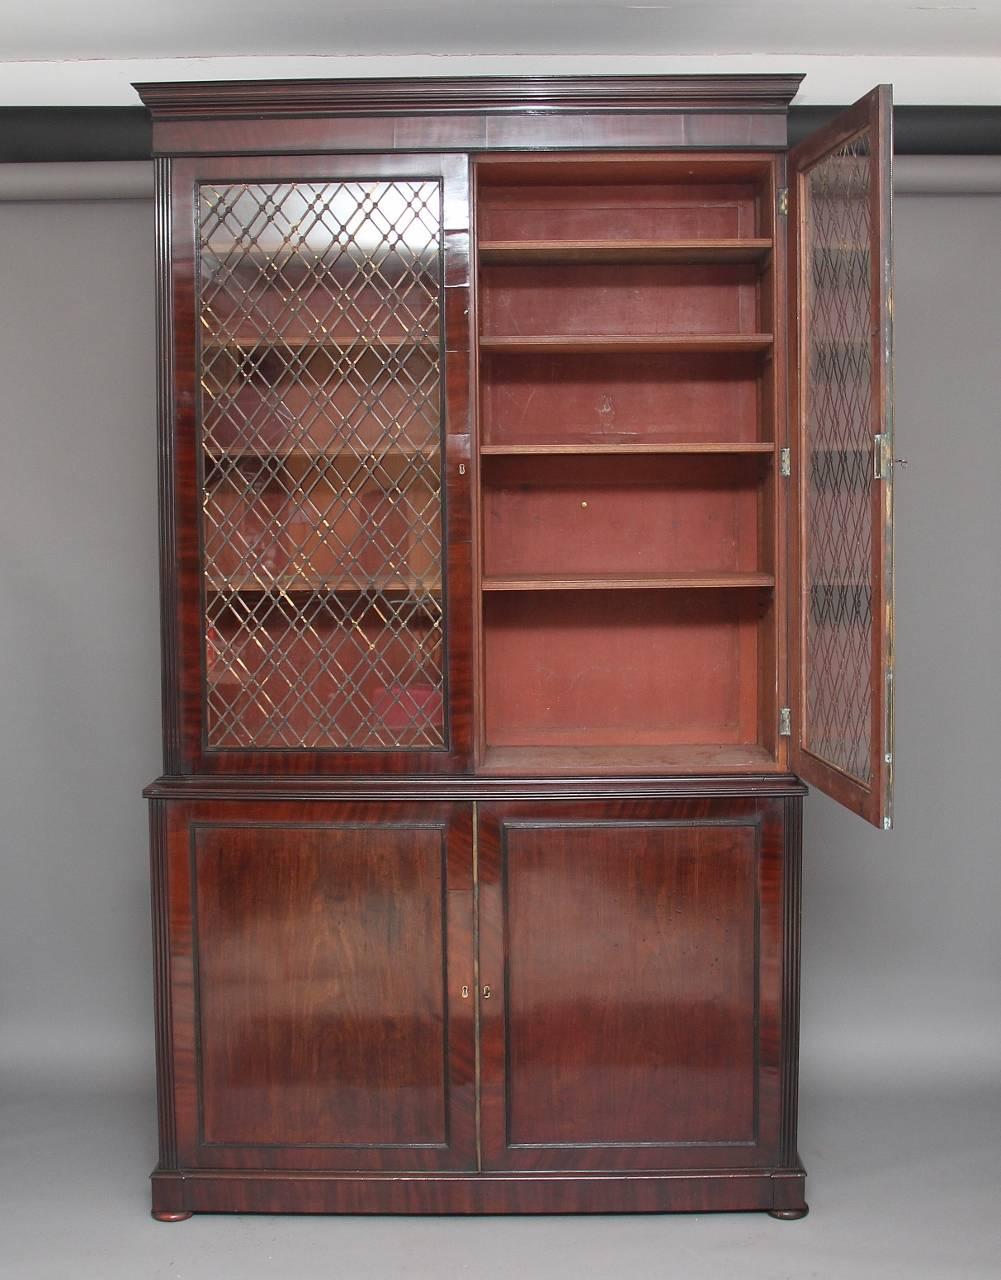 Early 19th century large Regency mahogany bookcase, the moulded cornice above a pair of glazed doors with brass grilles of intricate form, opening to reveal four adjustable shelves, with fluted columns running down from each side of the bookcase,